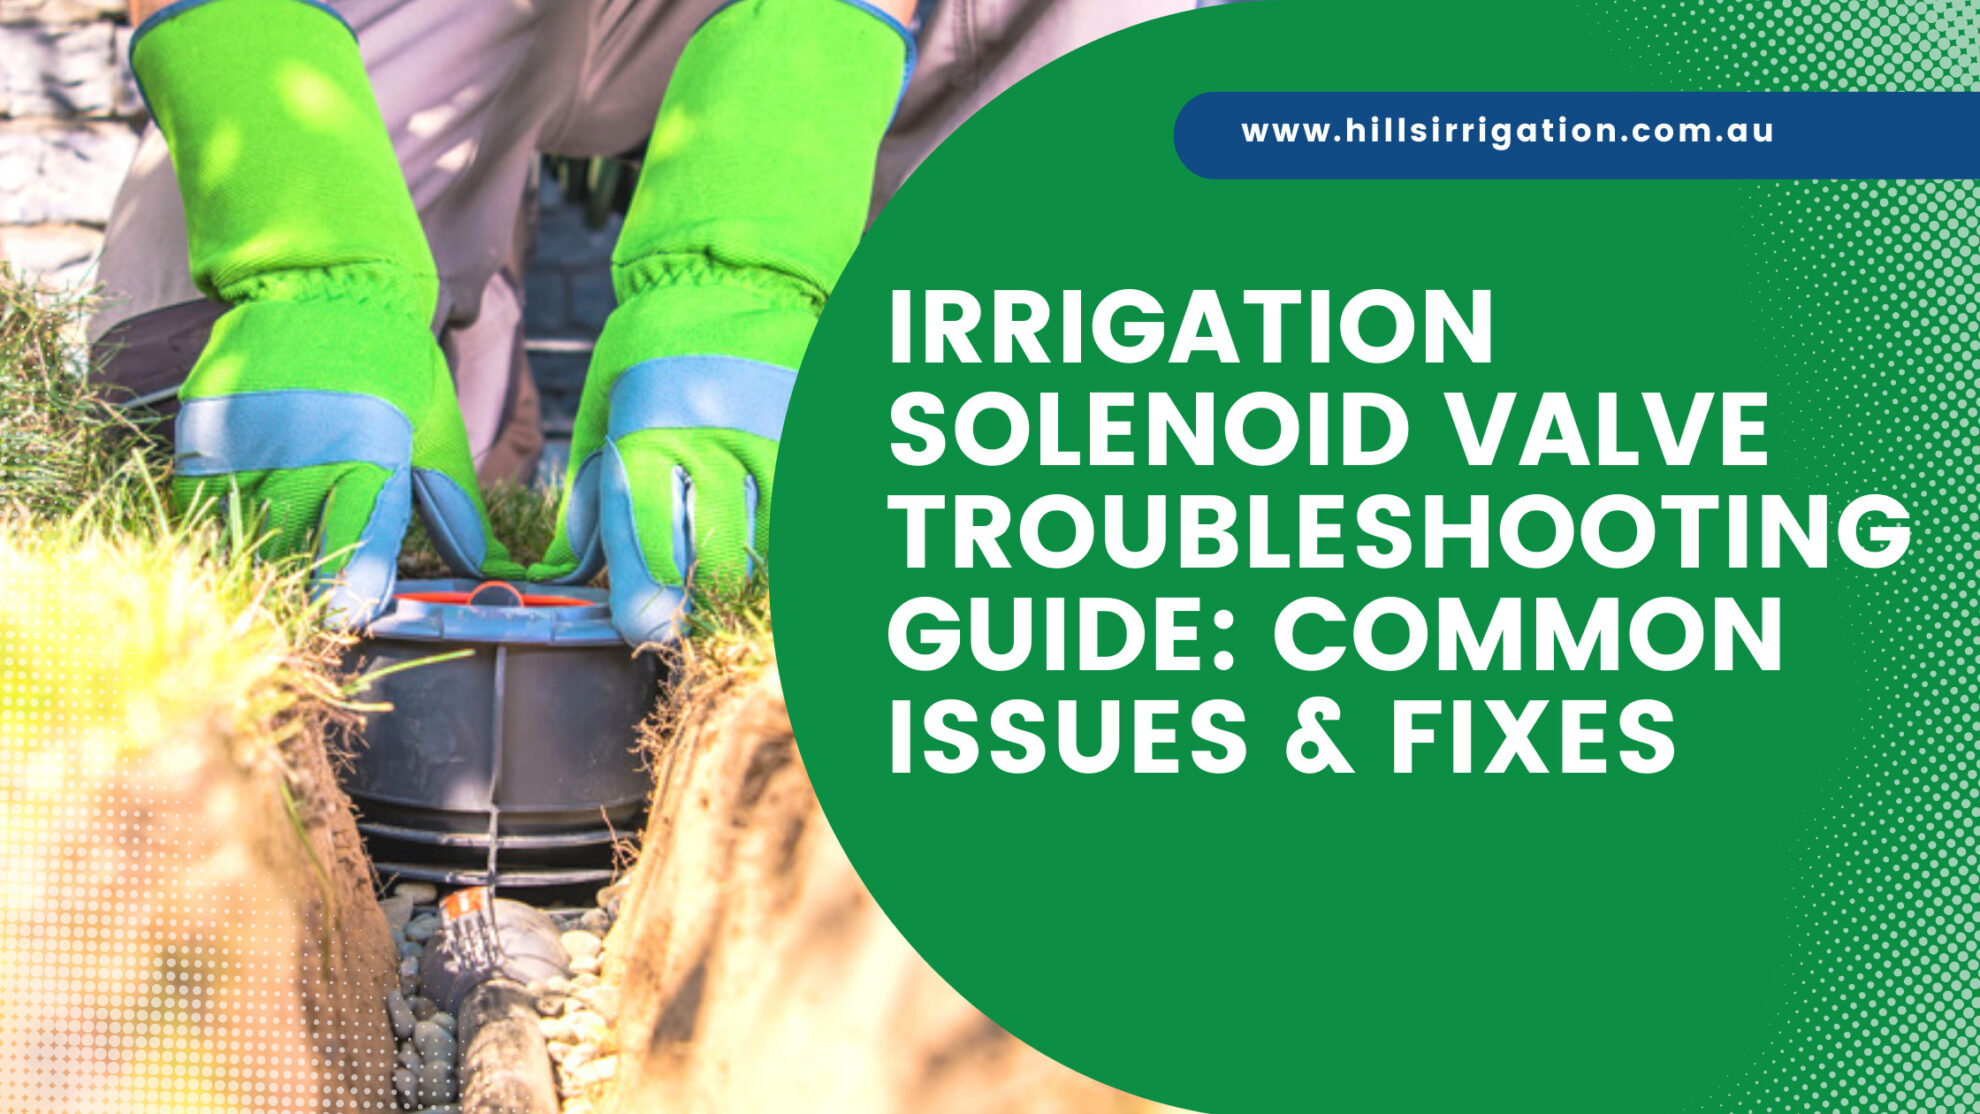 Irrigation Solenoid Valve Troubleshooting Guide  Common Issues & Fixes -  Hills Irrigation - Artists with Water